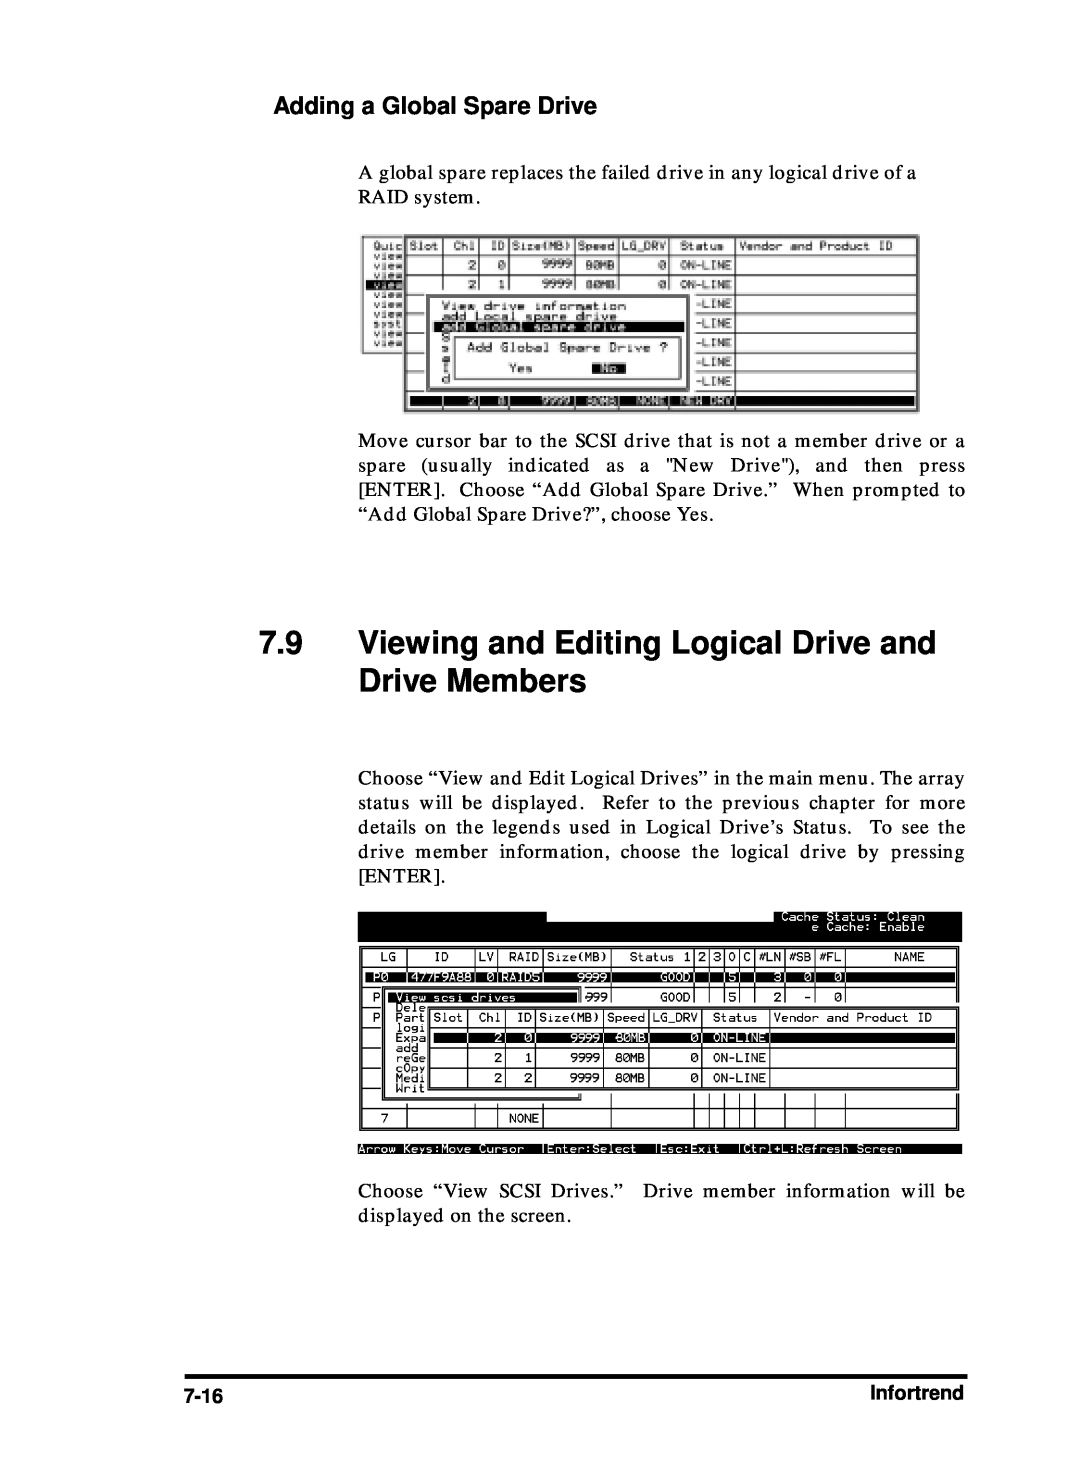 Compaq Infortrend manual Viewing and Editing Logical Drive and Drive Members, Adding a Global Spare Drive 